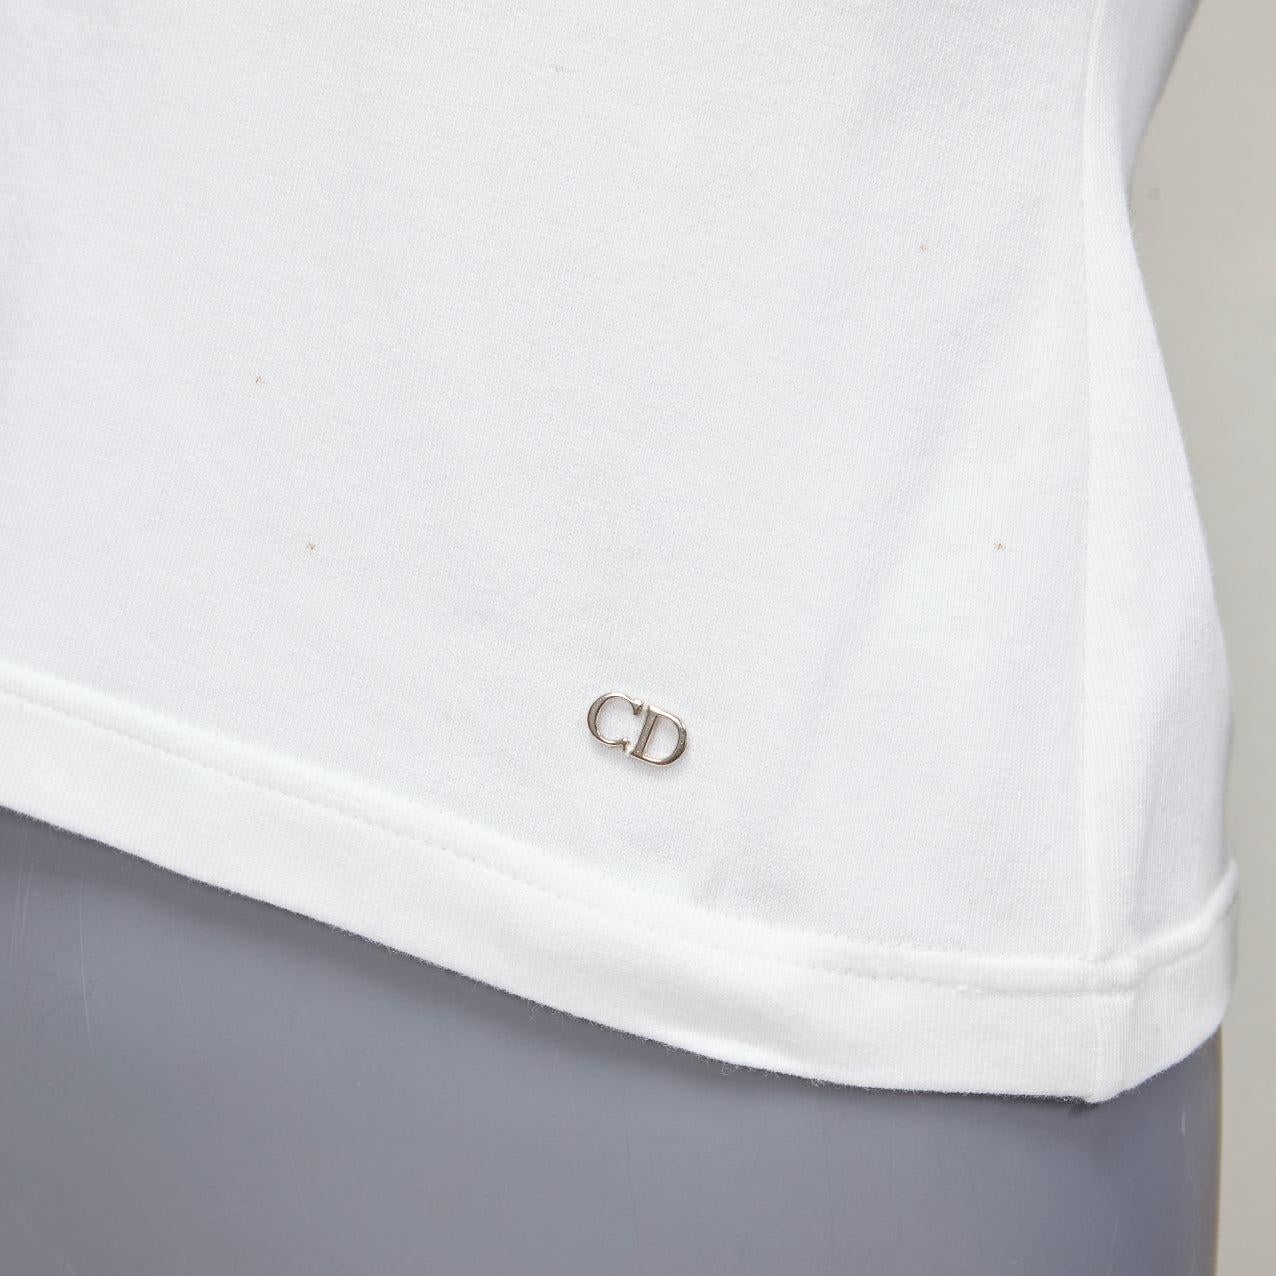 DIOR white cotton blend CD silver charm high strap tank top FR36 XS
Reference: AAWC/A01136
Brand: Dior
Designer: Maria Grazia Chiuri
Material: Cotton, Blend
Color: White
Pattern: Solid
Closure: Pullover
Extra Details: CD logo plate at left hem.
Made